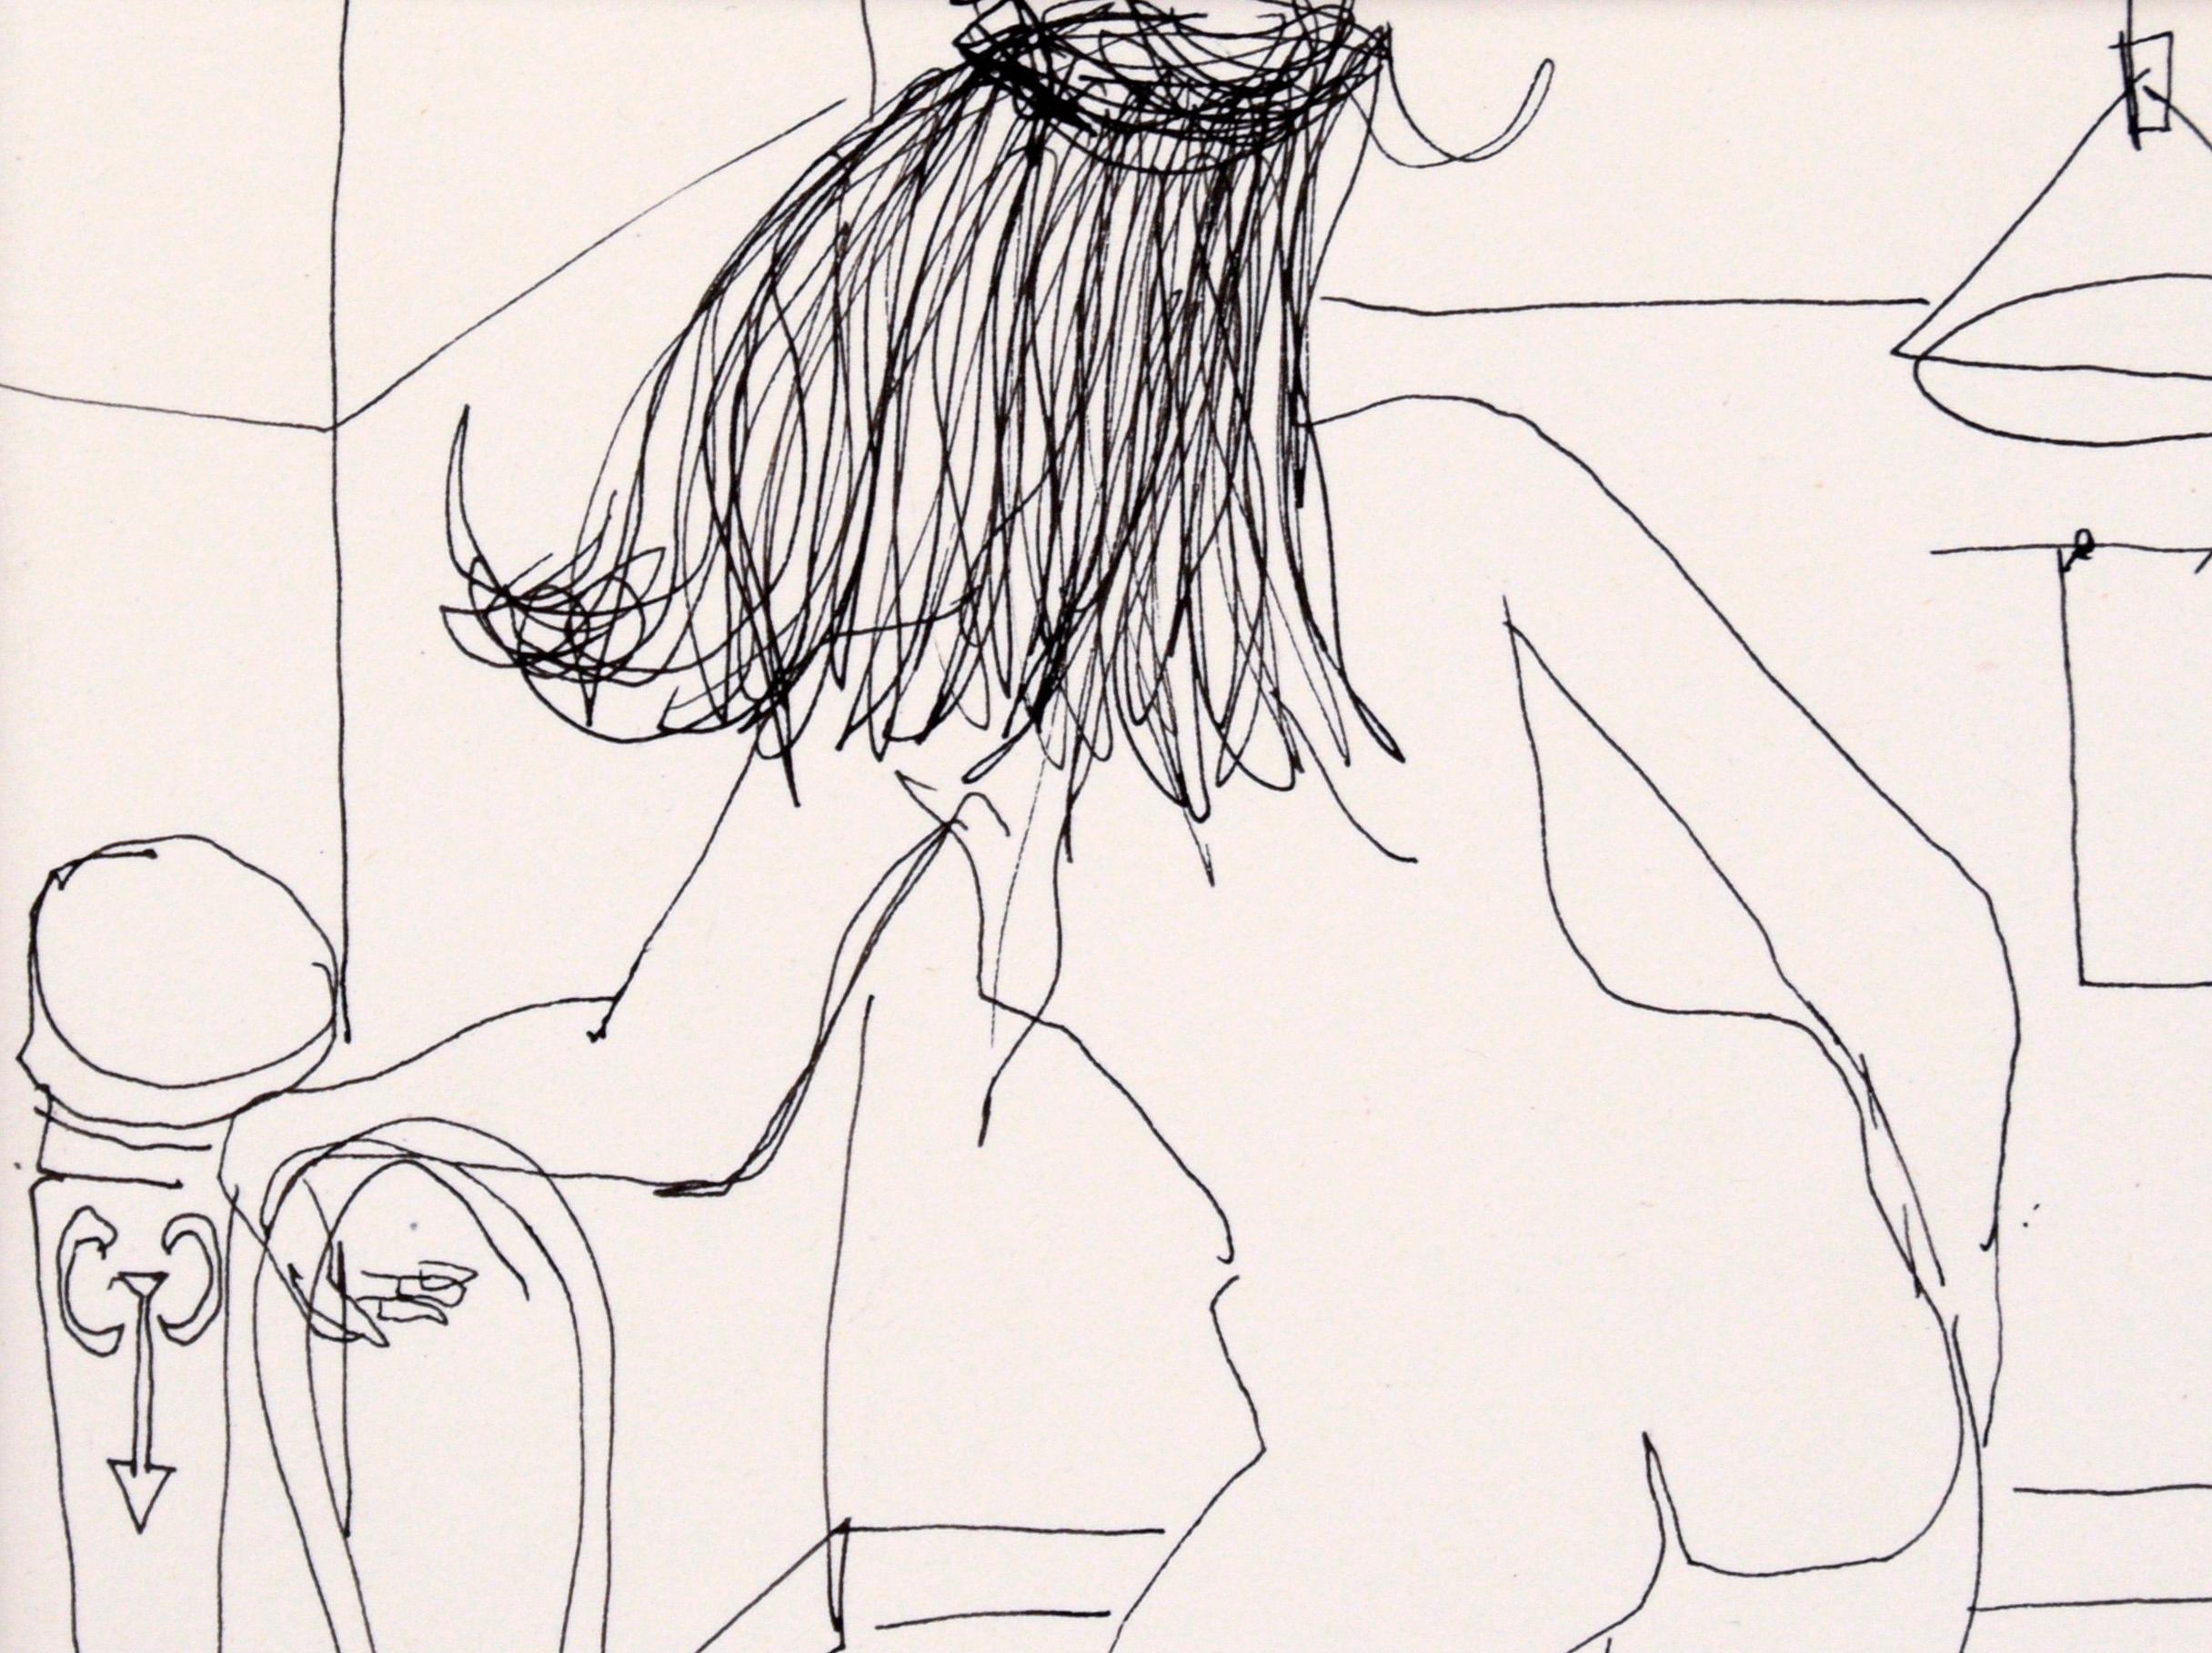 Life Drawing I - Figurative Female Nude in Pen on Paper - Contemporary Art by Unknown